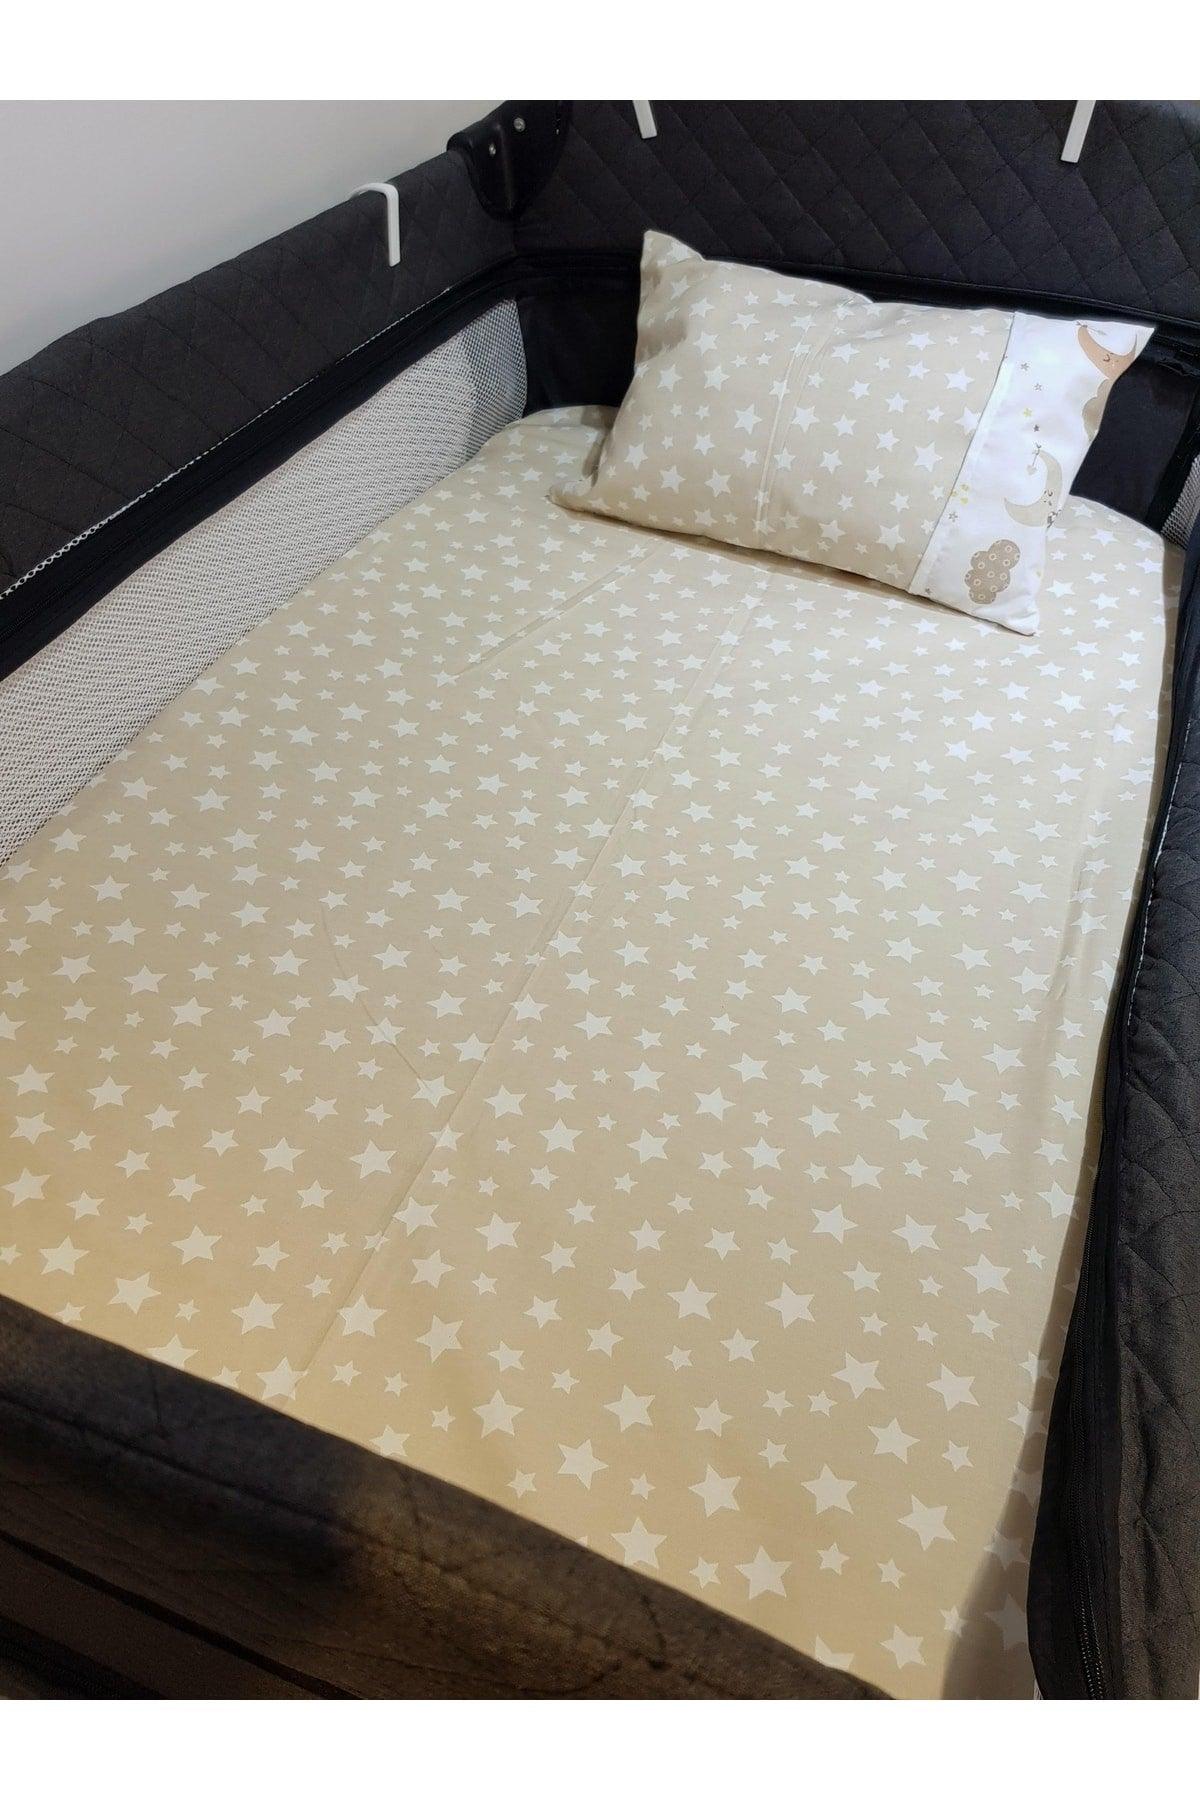 Star Pattern Elastic Bed Sheet ** Pillow And